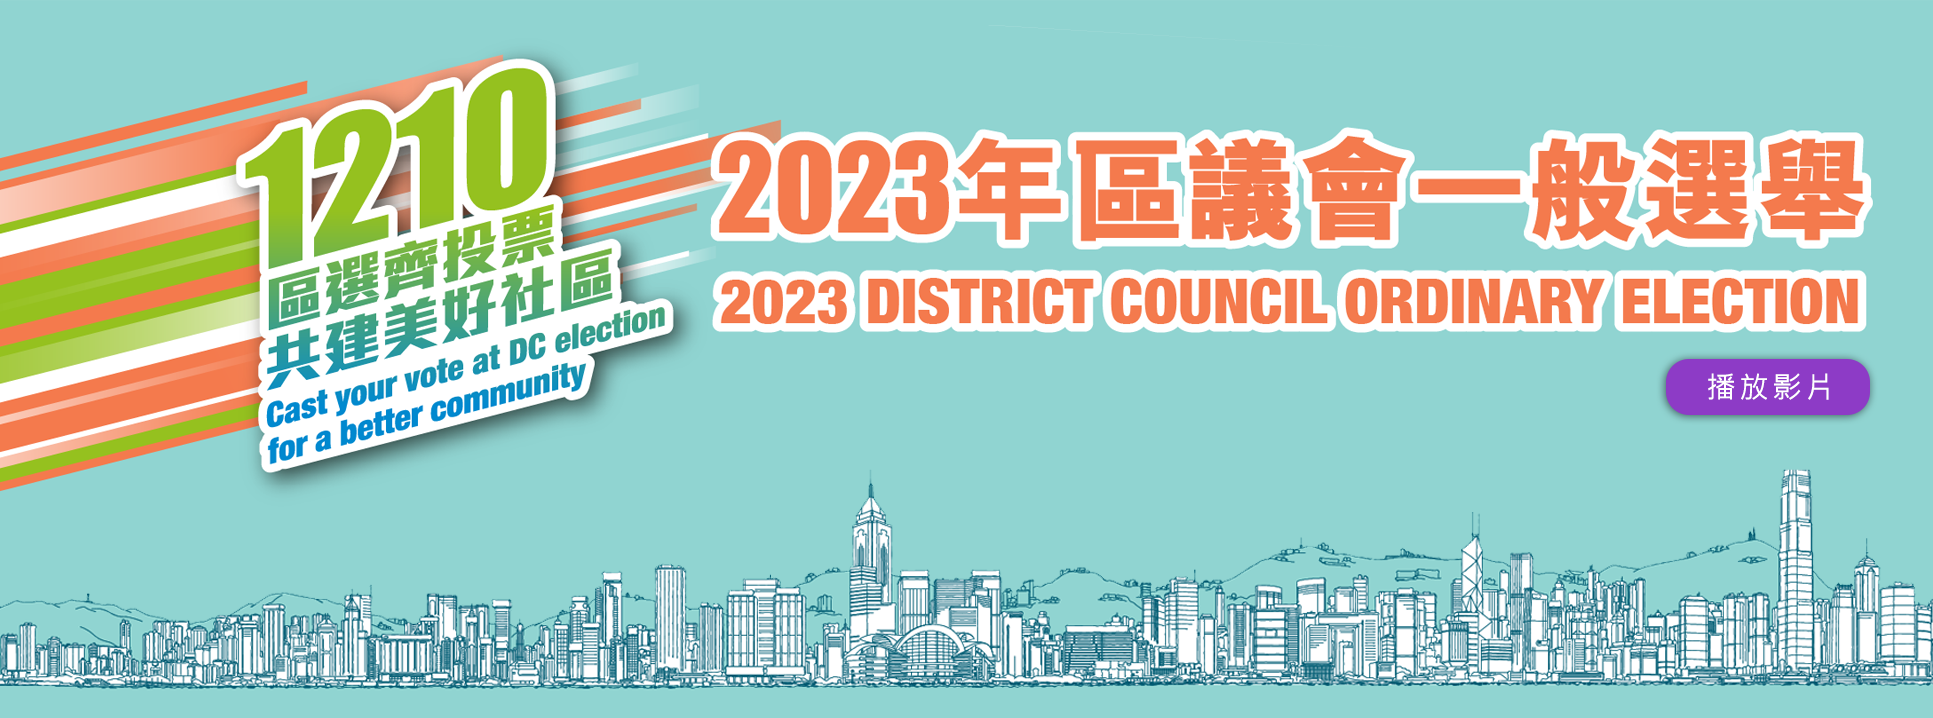 Promote 2023 District Council Ordinary Election